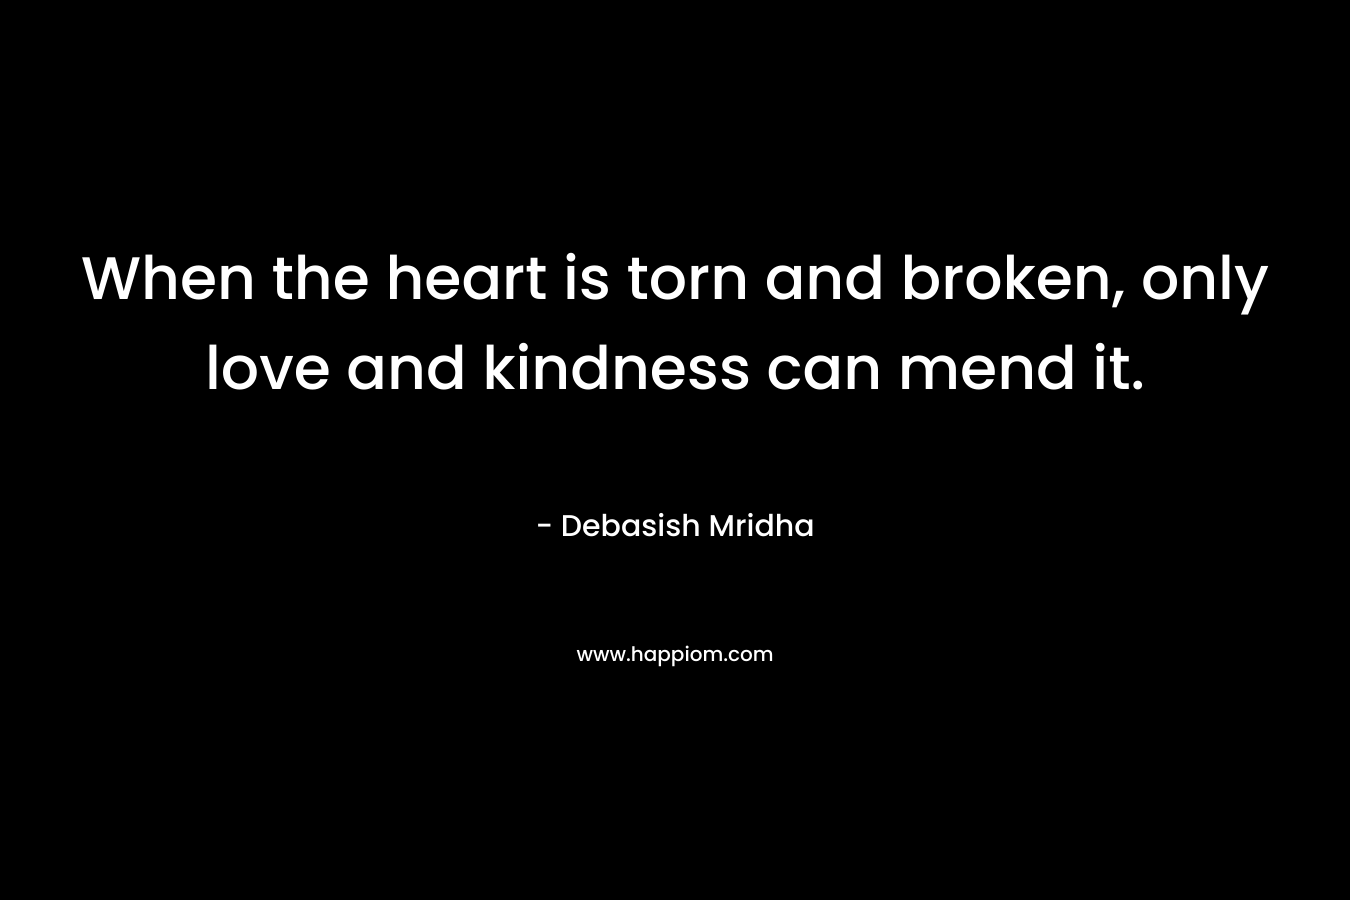 When the heart is torn and broken, only love and kindness can mend it.